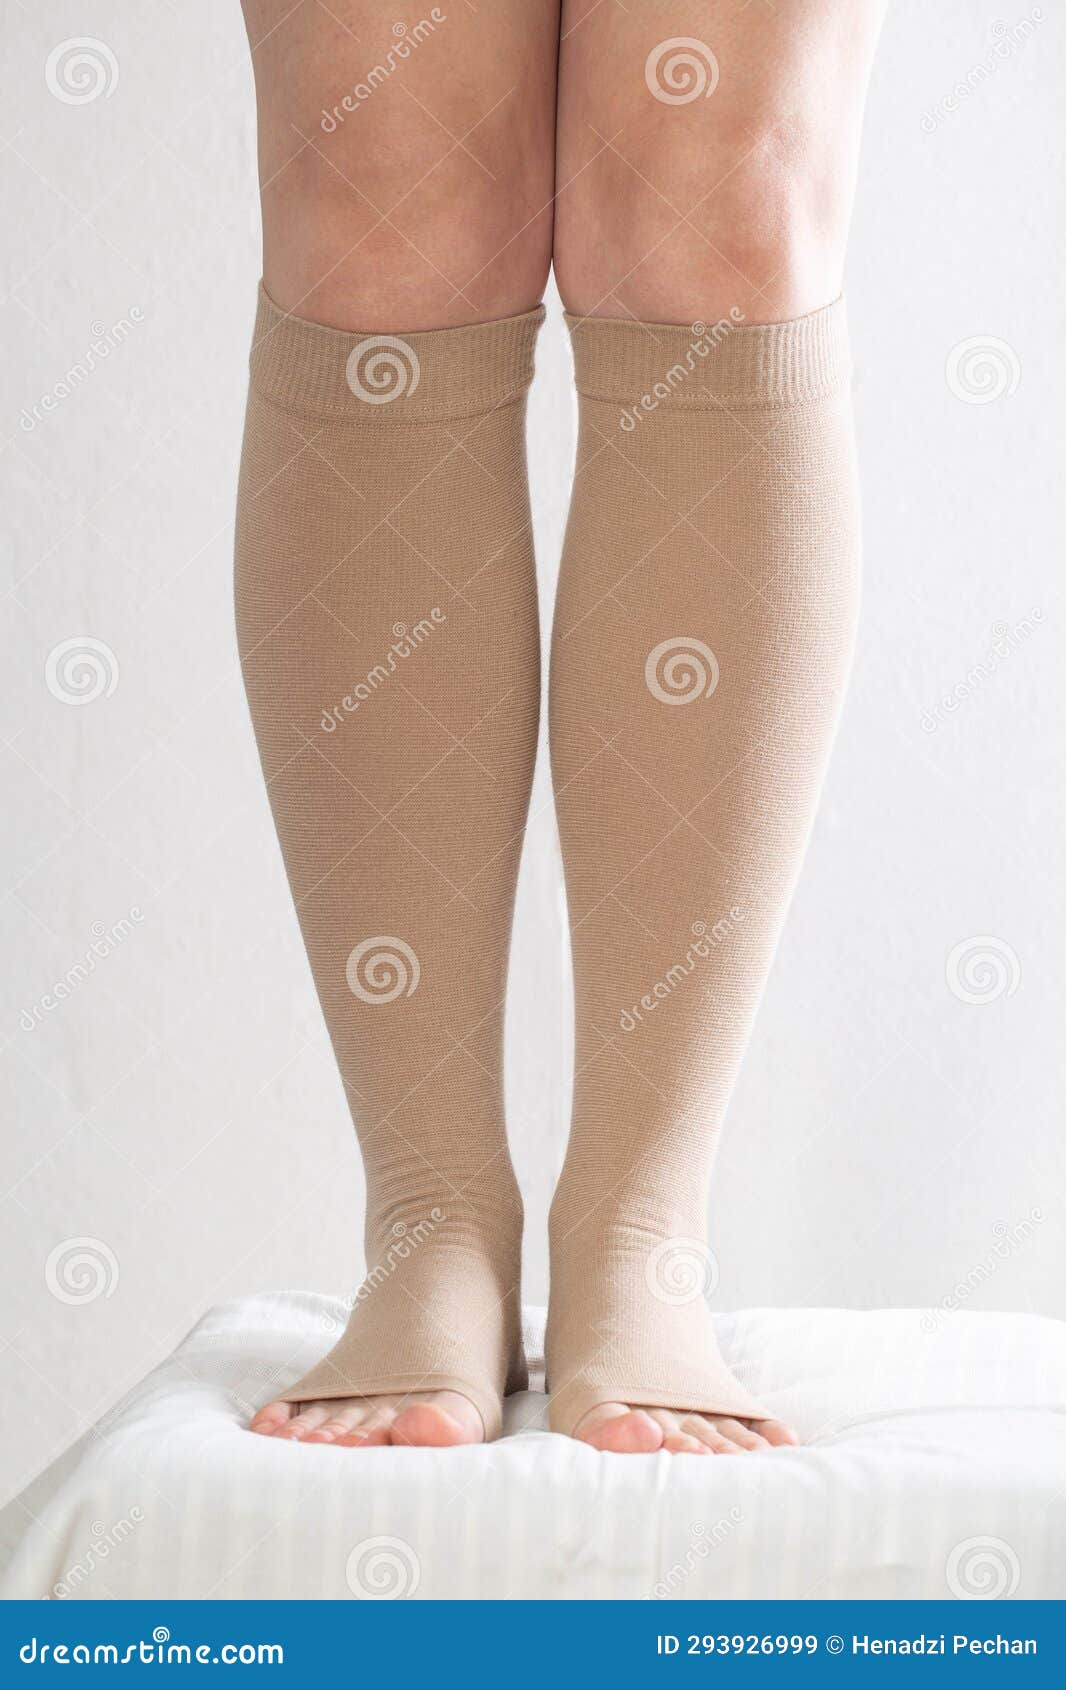 Female Legs in Compression Stockings for Varicose Veins on the